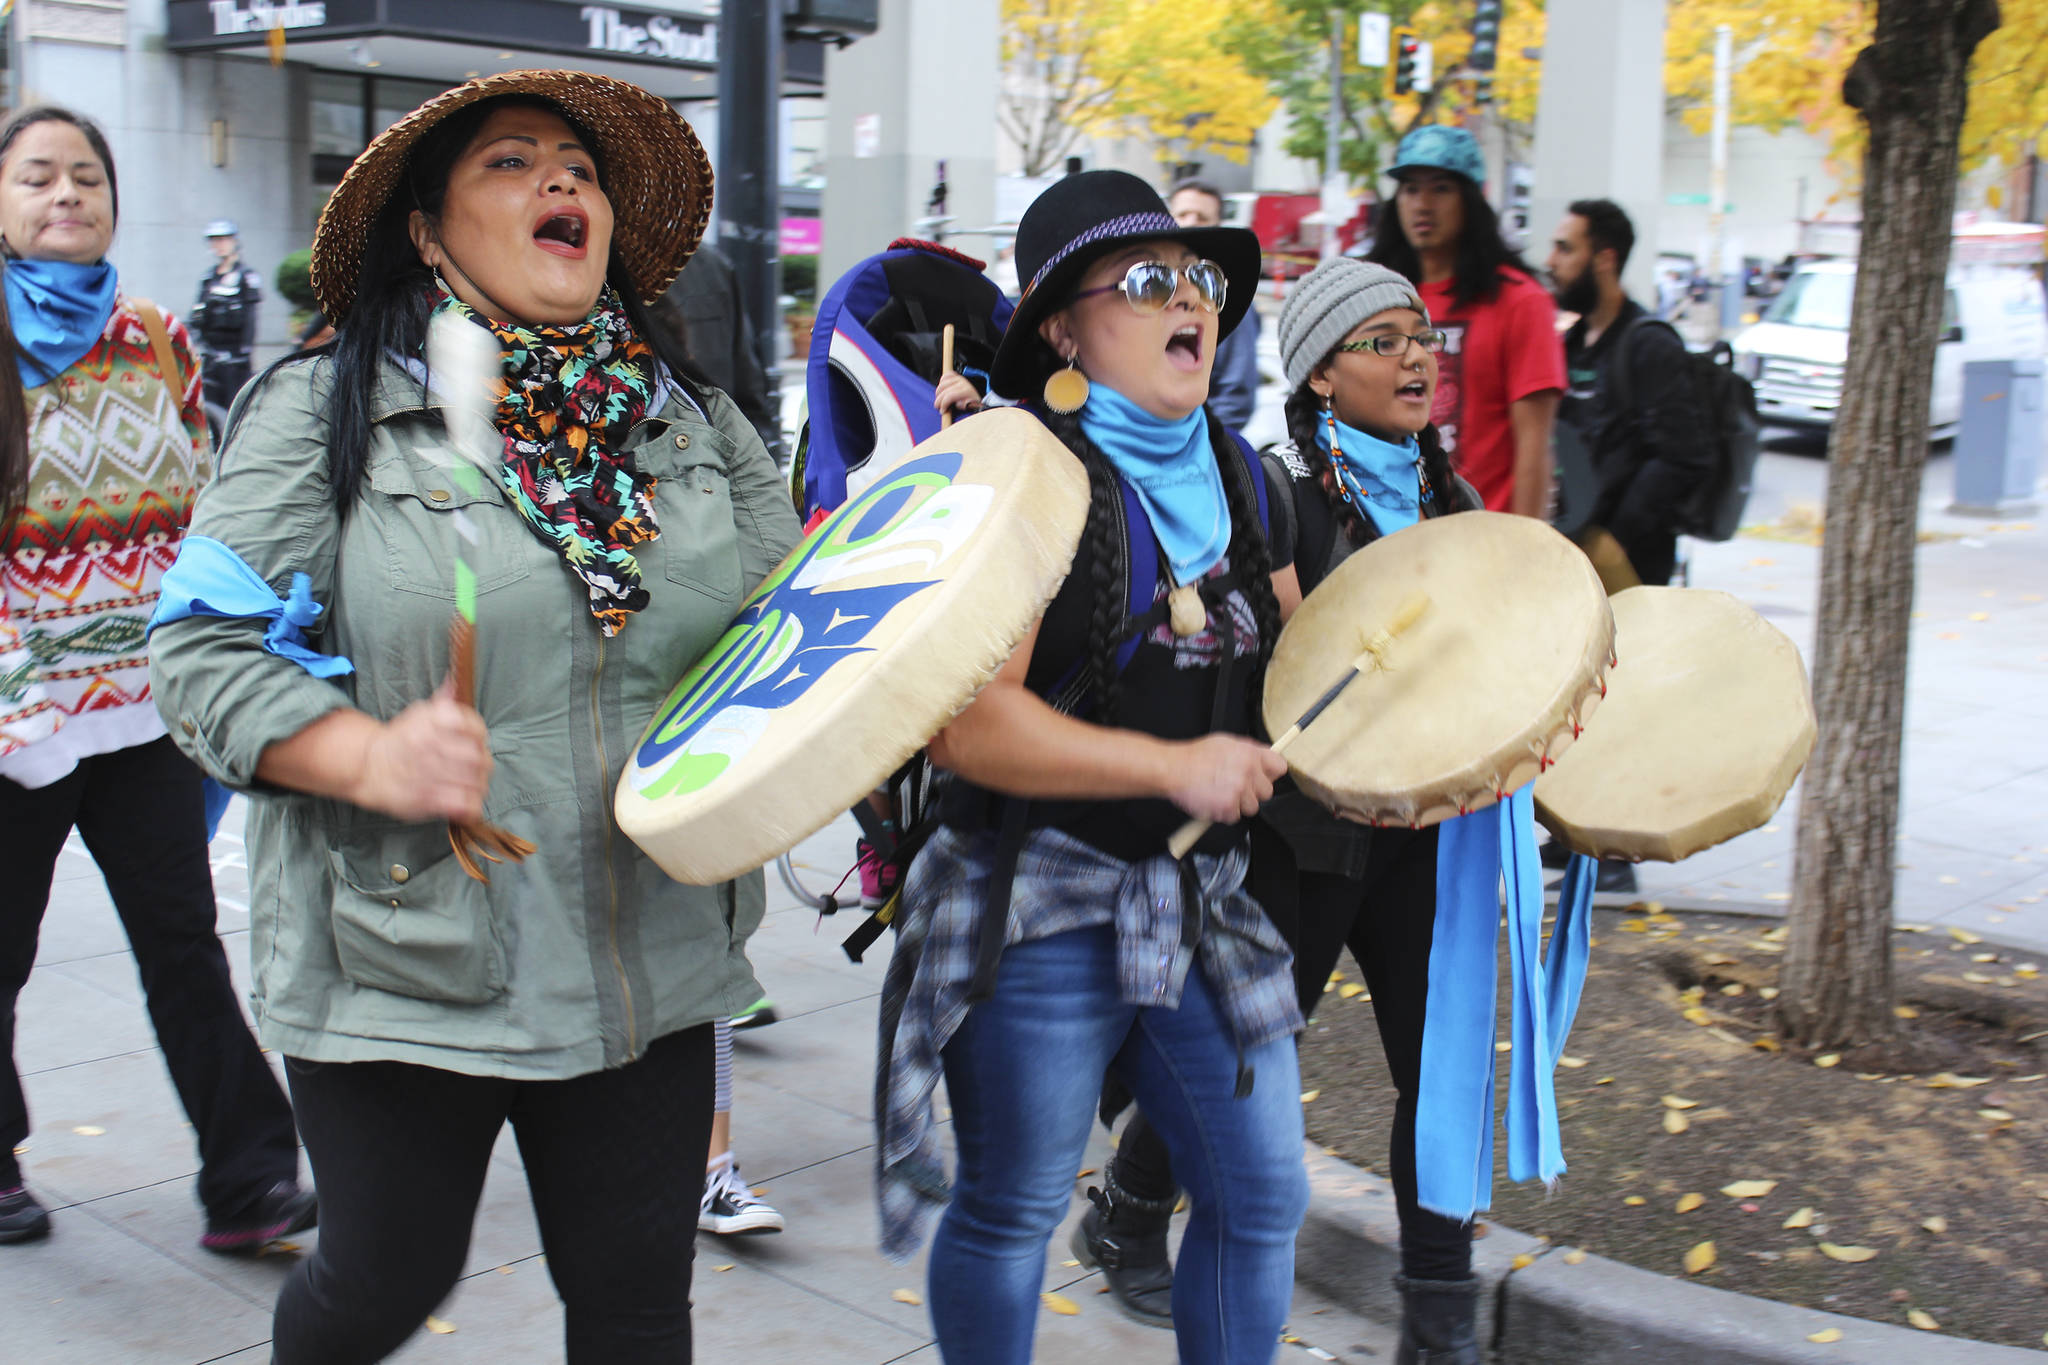 Activists Disrupt Over 100 Bank Branches Across Seattle for Financing Tar Sands Projects